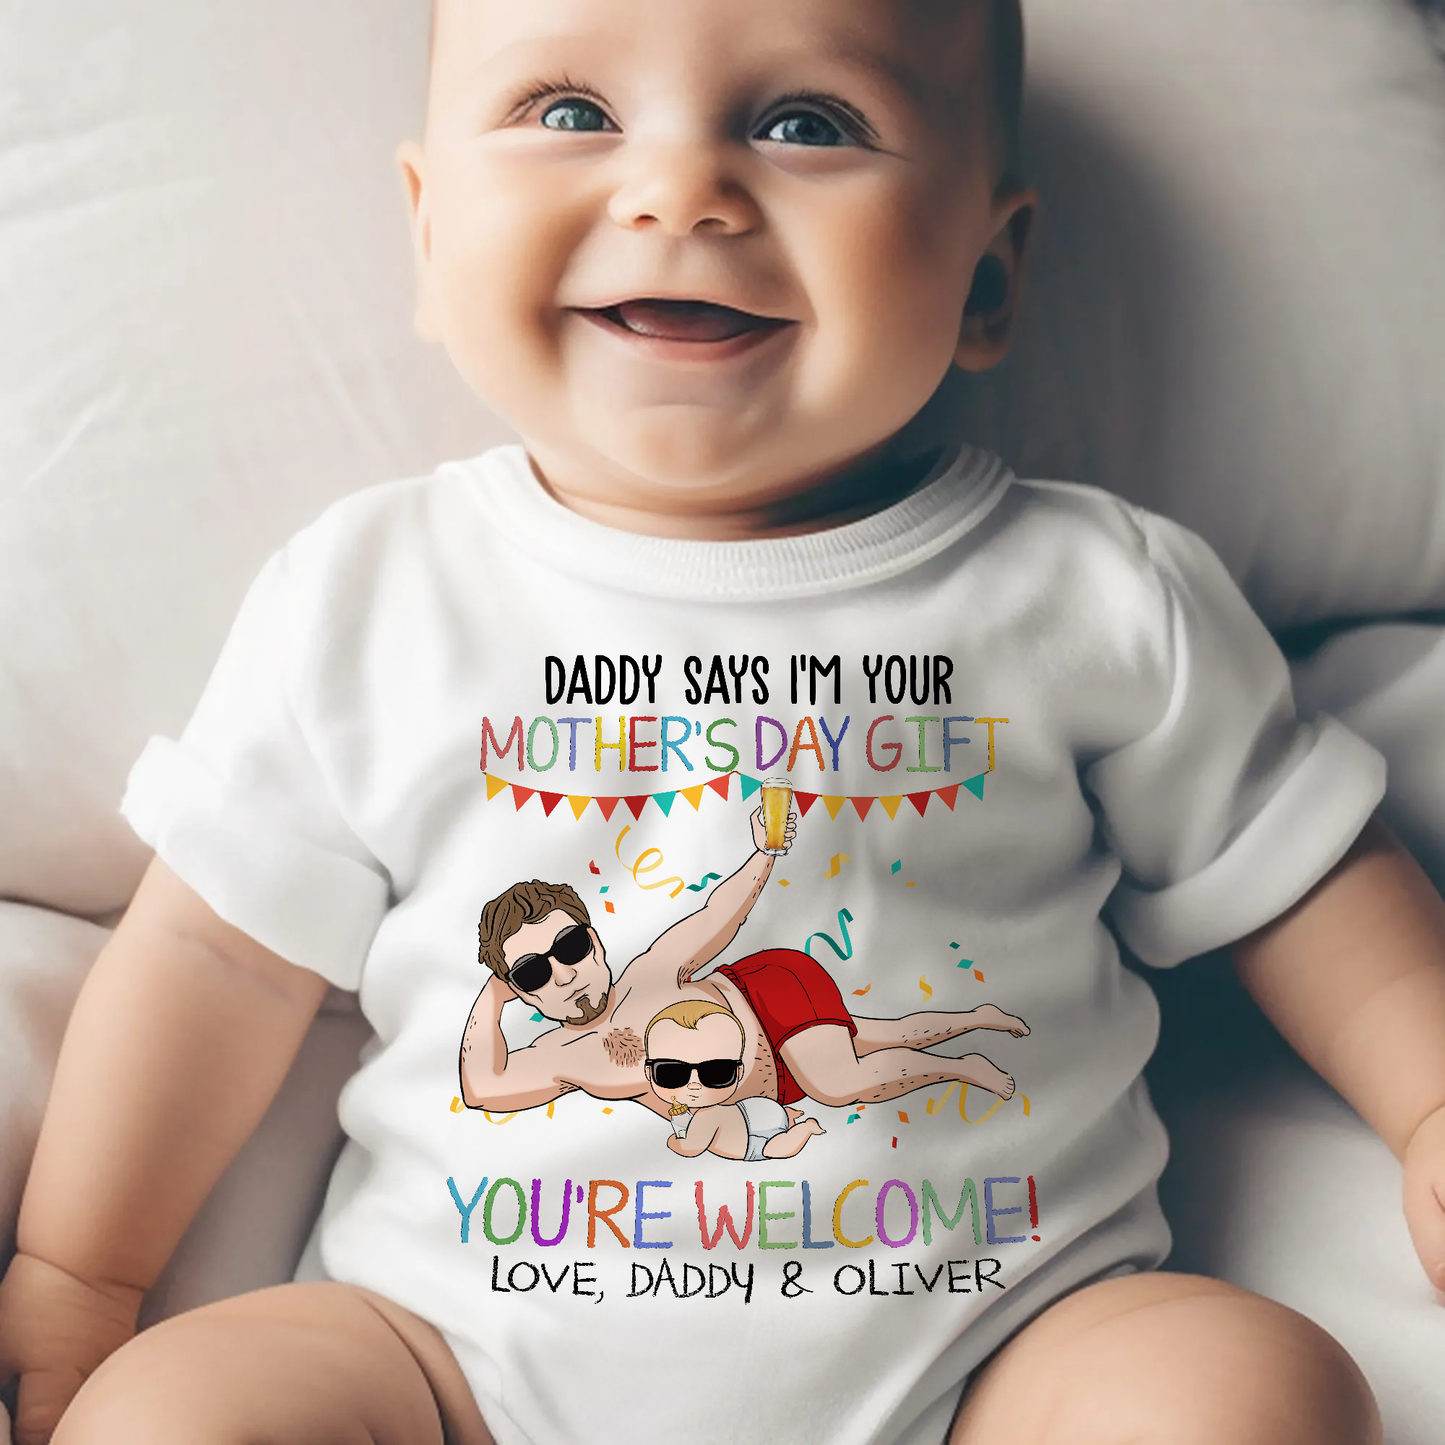 Daddy Says I'm Your Mother's Day Gift You're Welcome - Personalized Baby Onesie